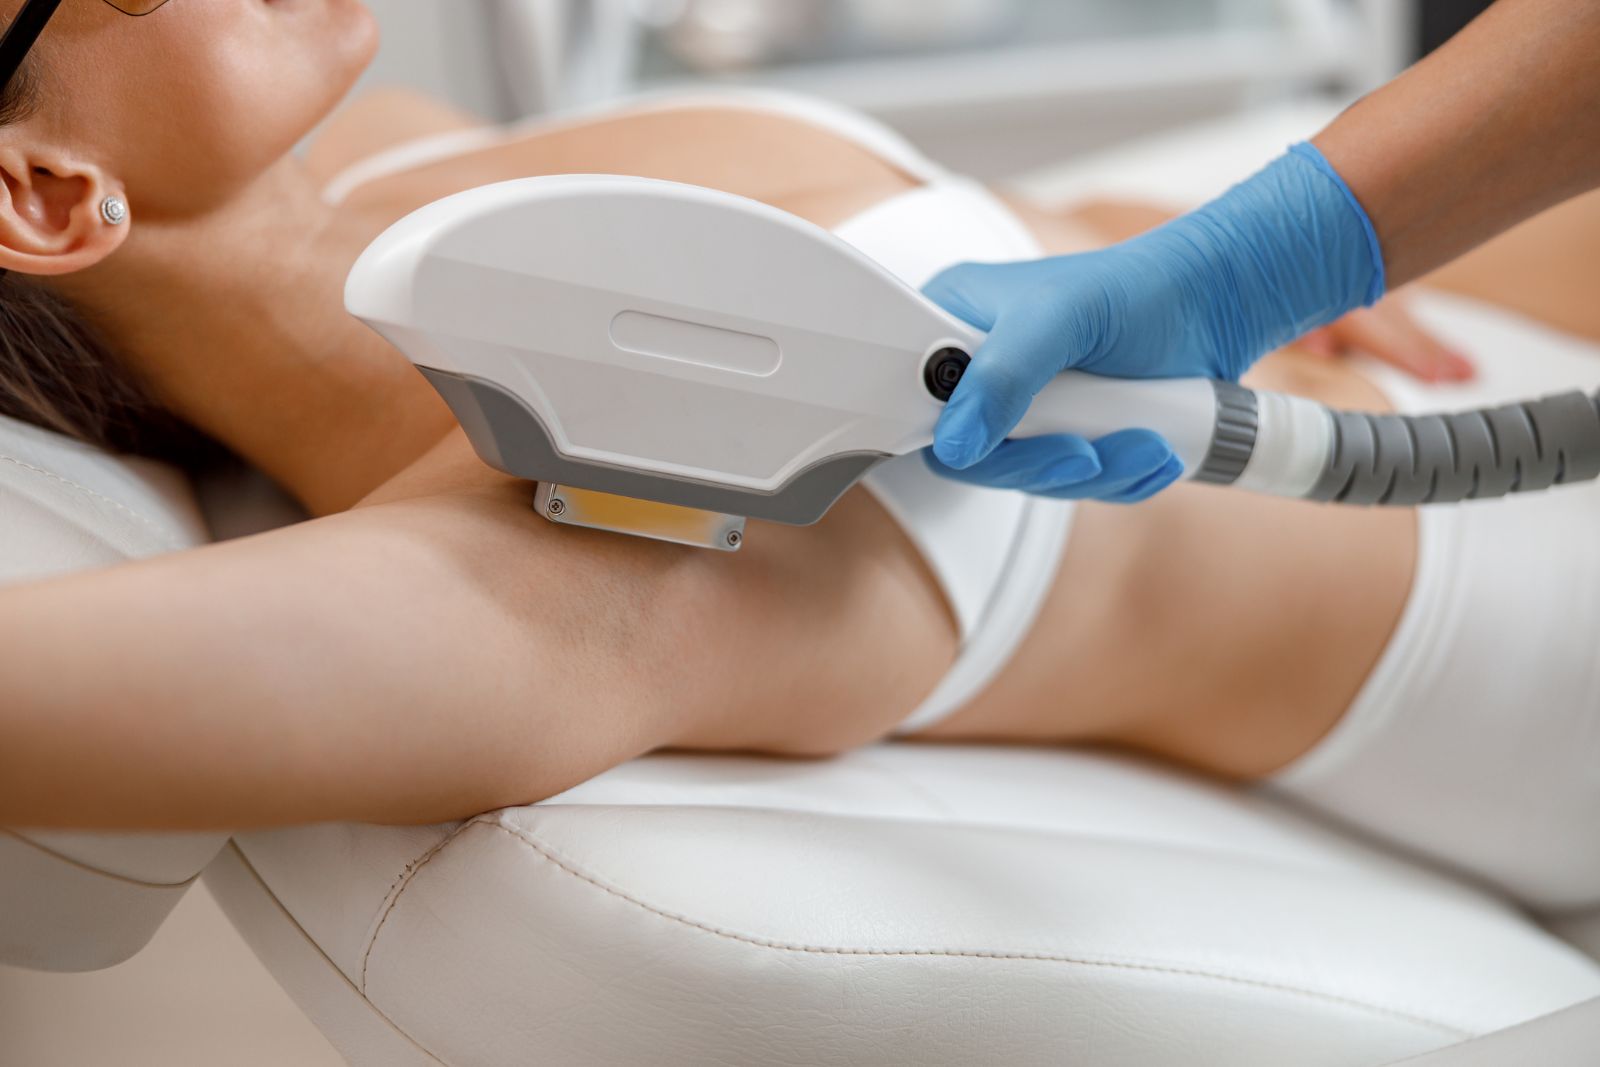 Closeup of Armpit Hair Laser Removal Procedure with Ipl Machine in a Beauty Salon